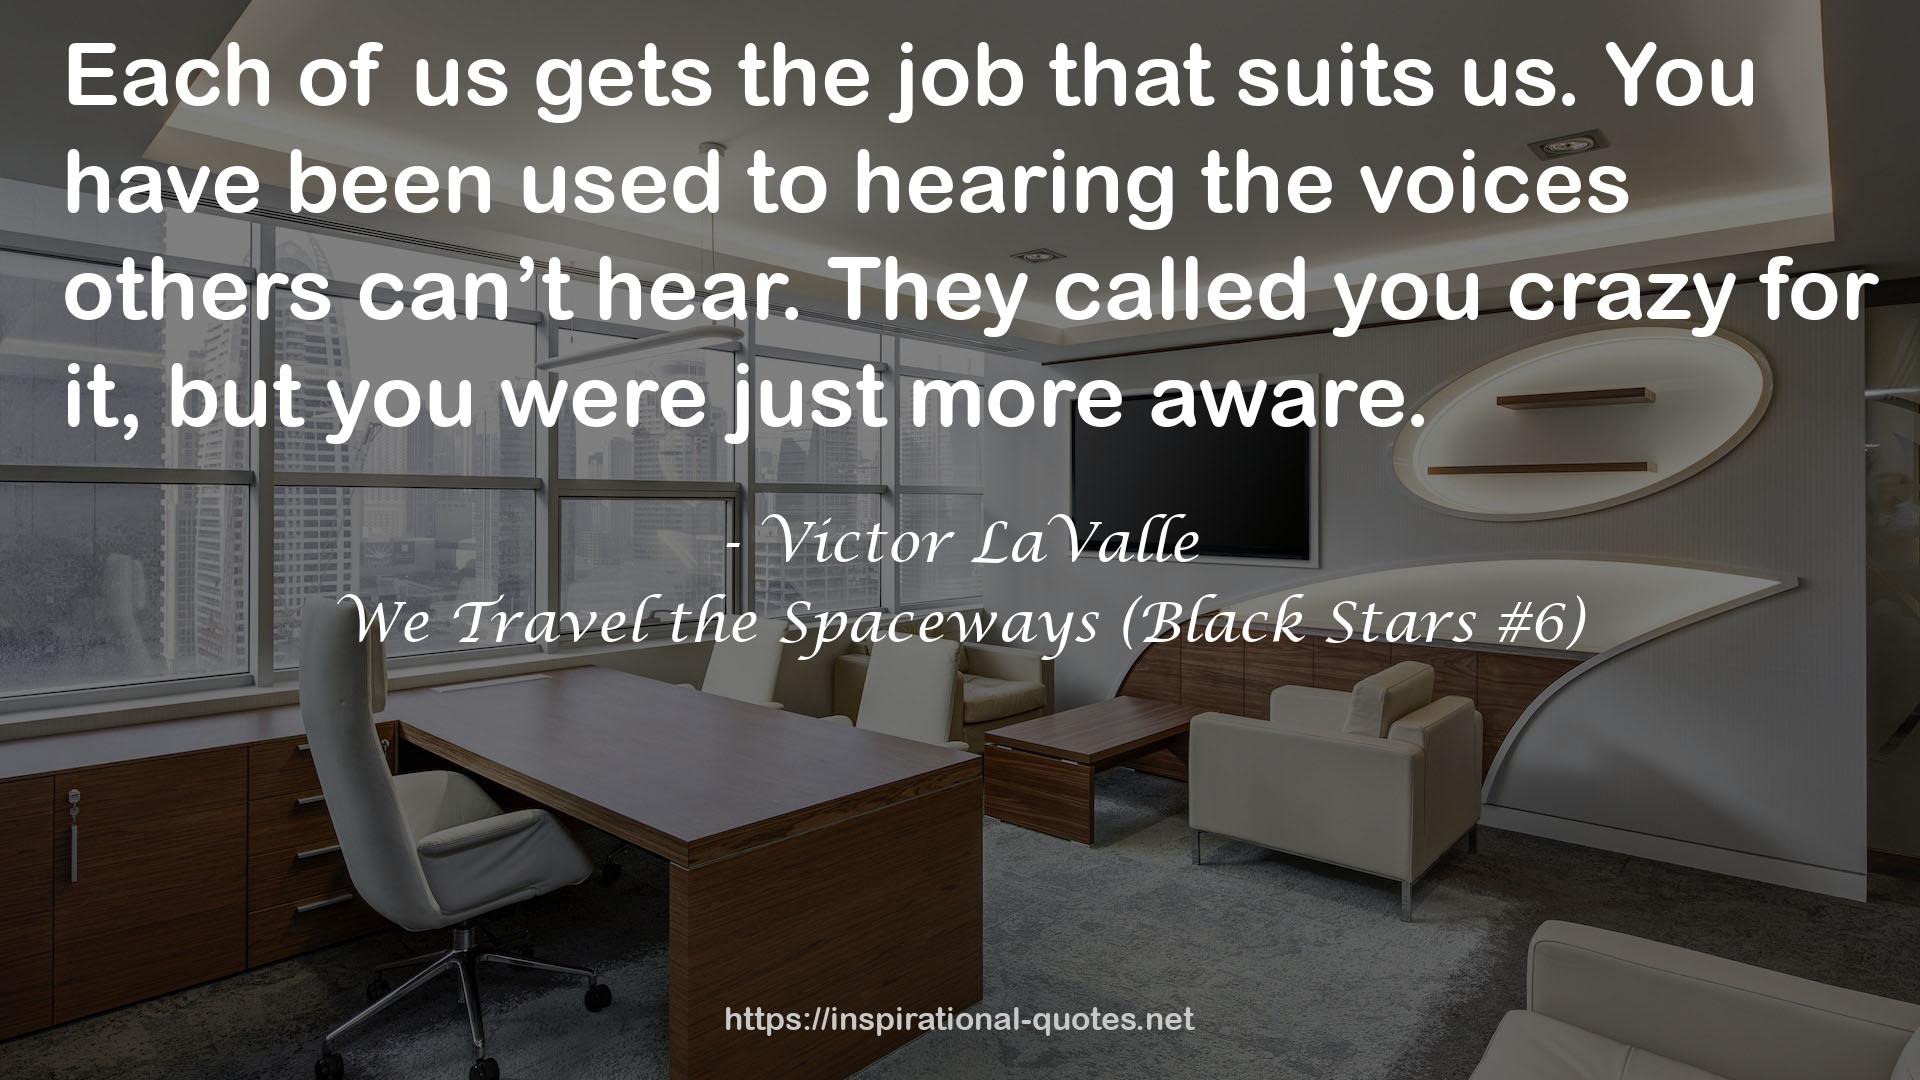 We Travel the Spaceways (Black Stars #6) QUOTES